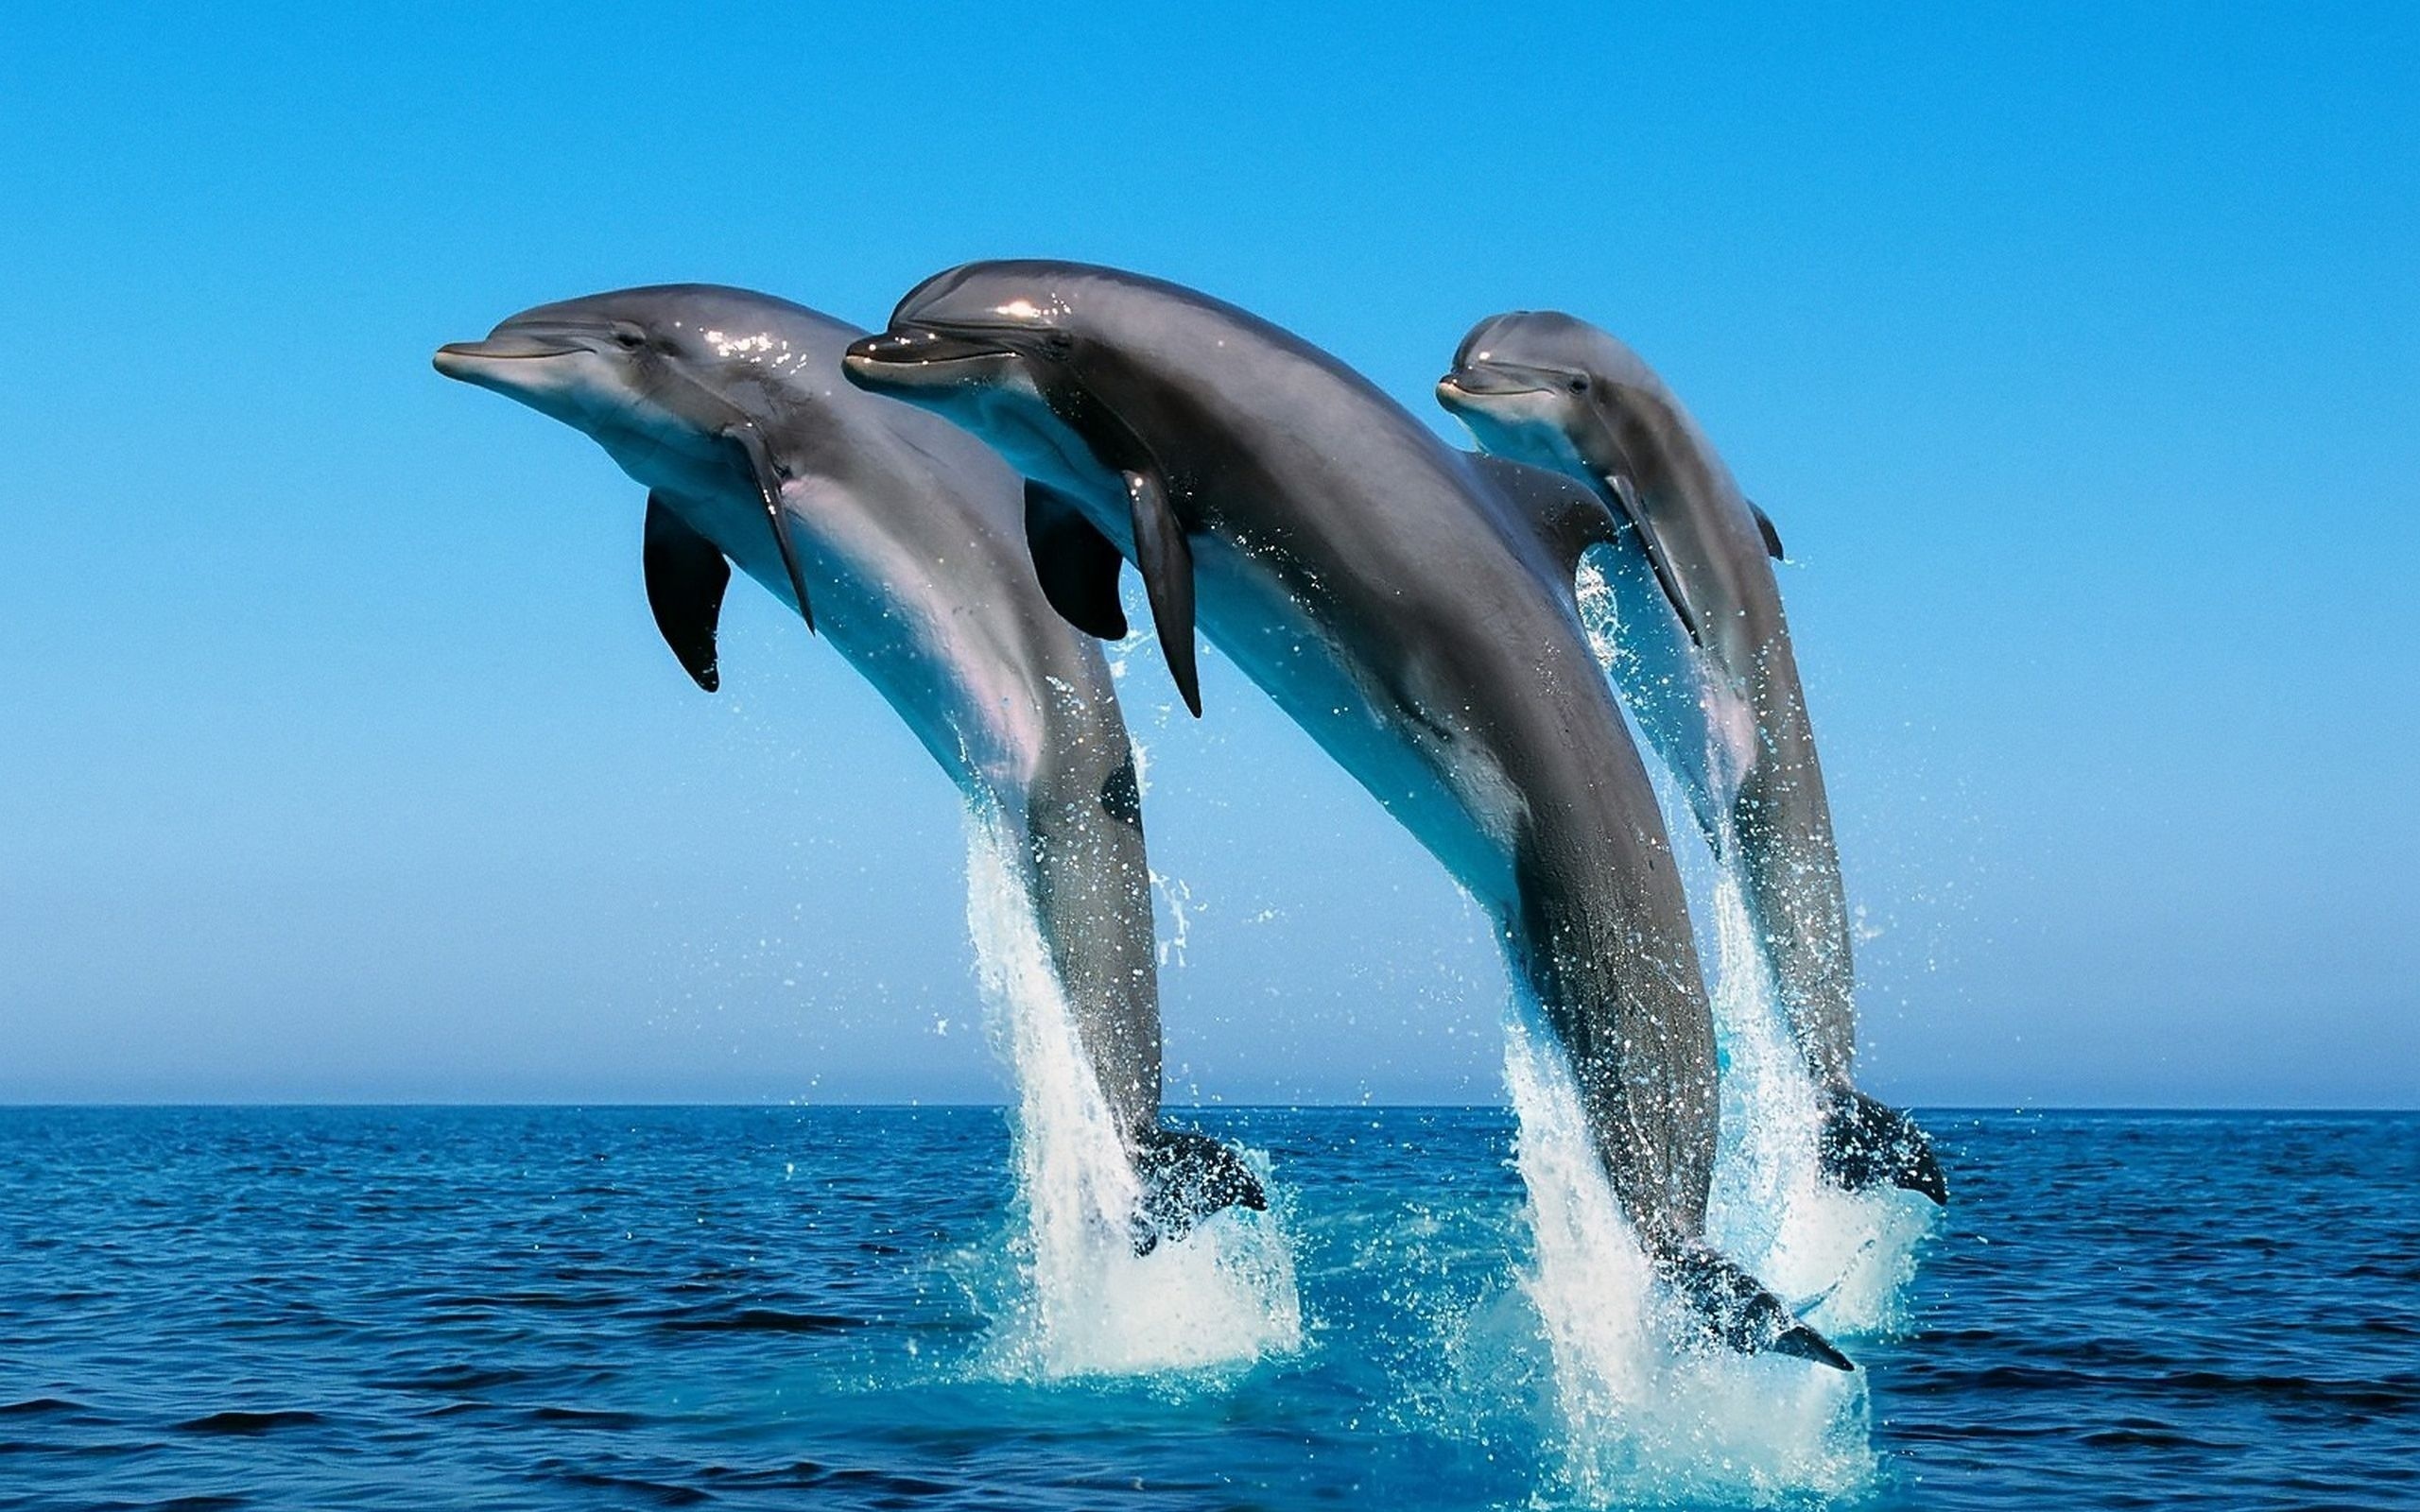 dolphin images